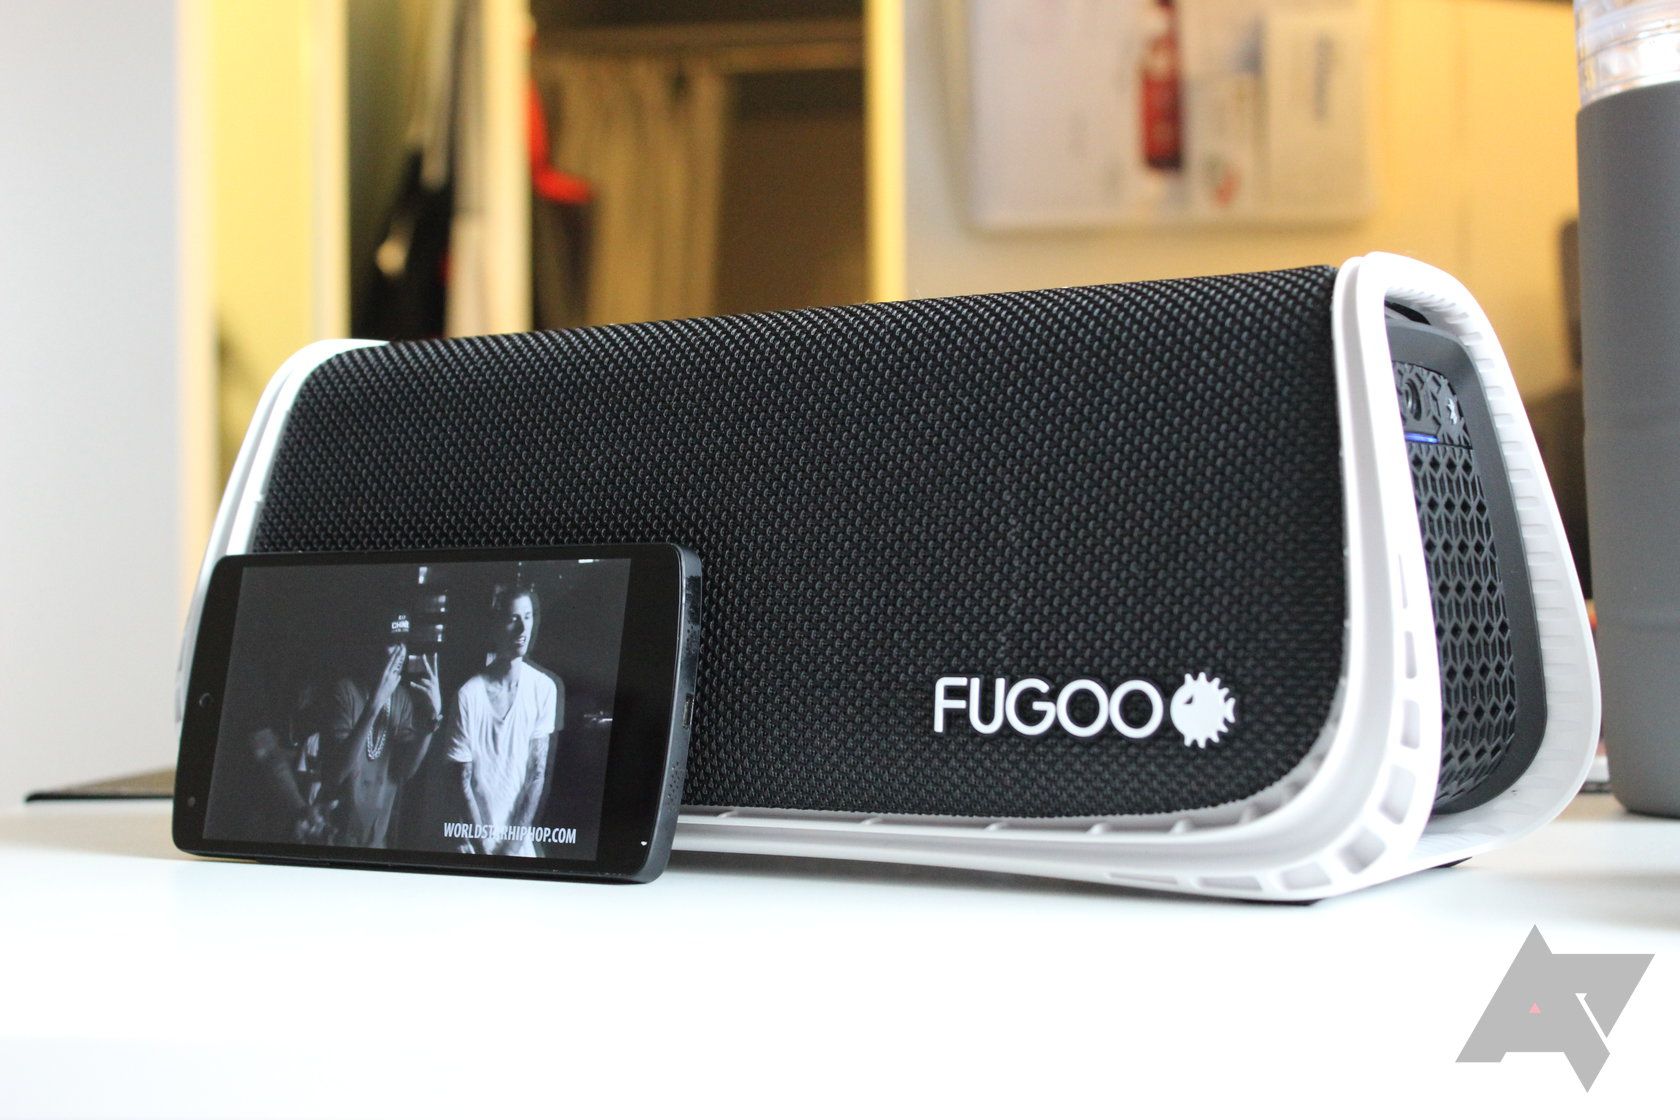 snack Abnorm stramt Fugoo XL Bluetooth Speaker Review: First In Durability, Second In Sound